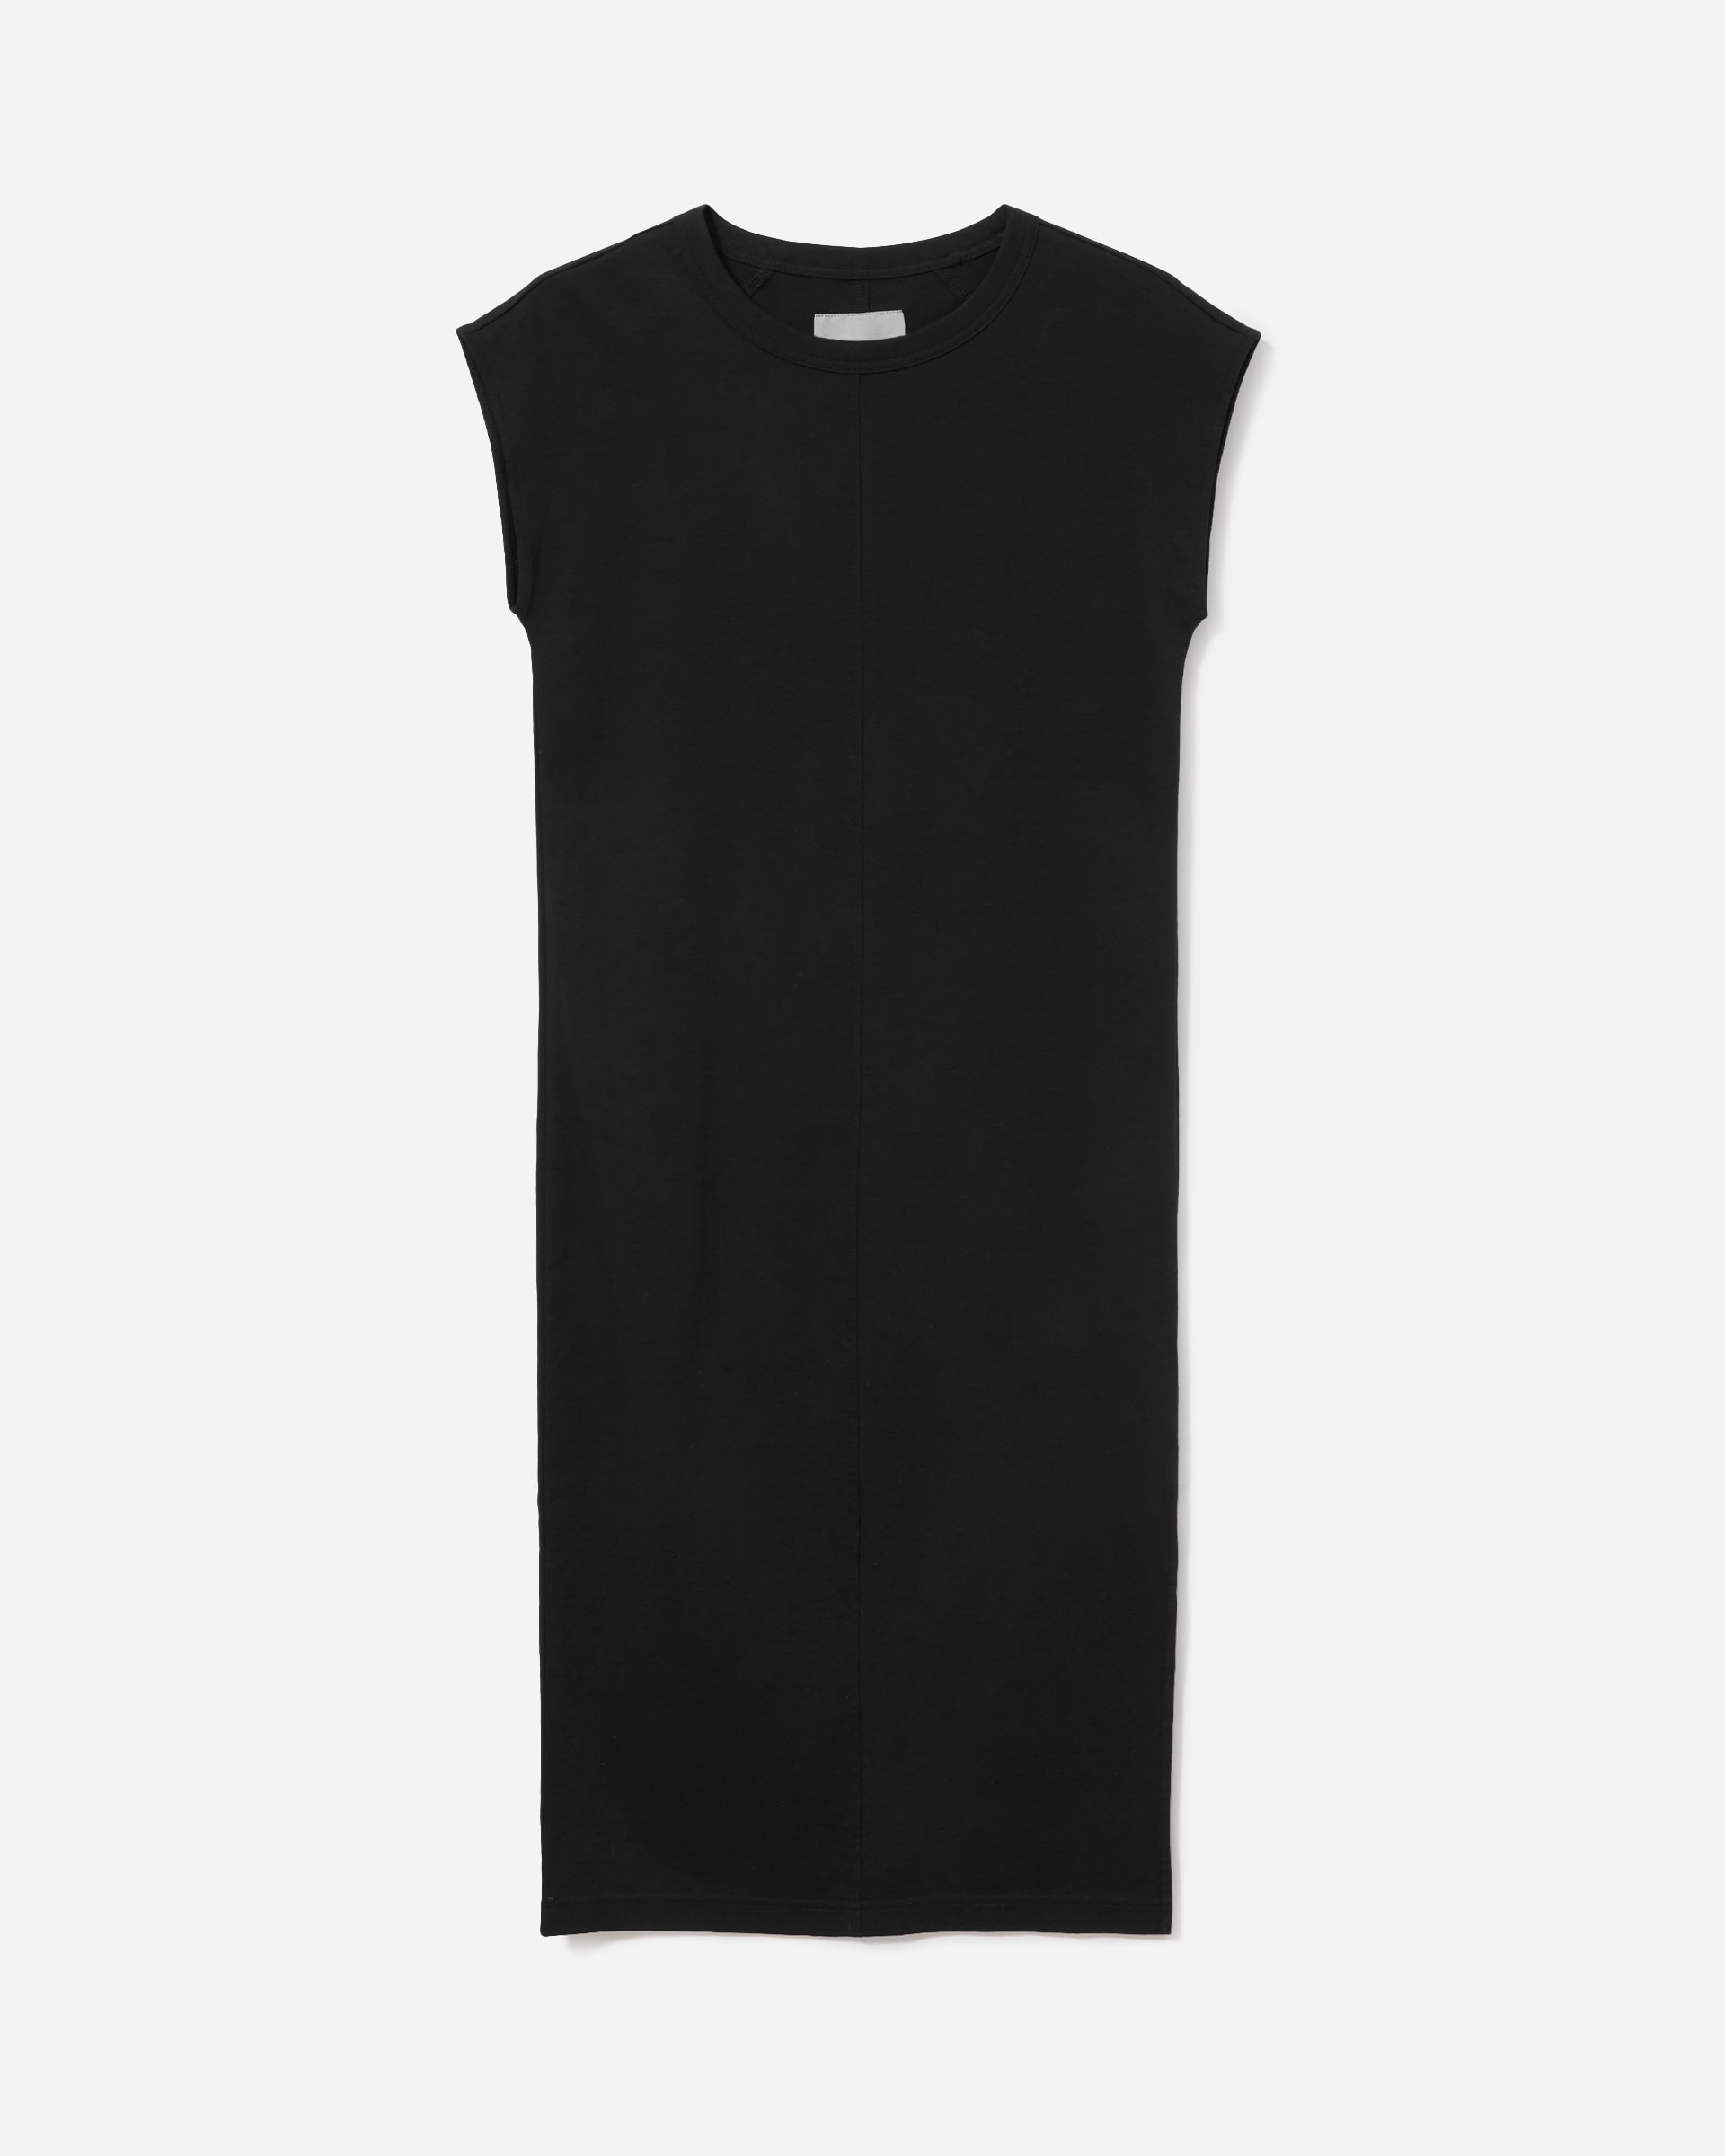 The Luxe Cotton Side-Slit Tee Dress Black – Everlane